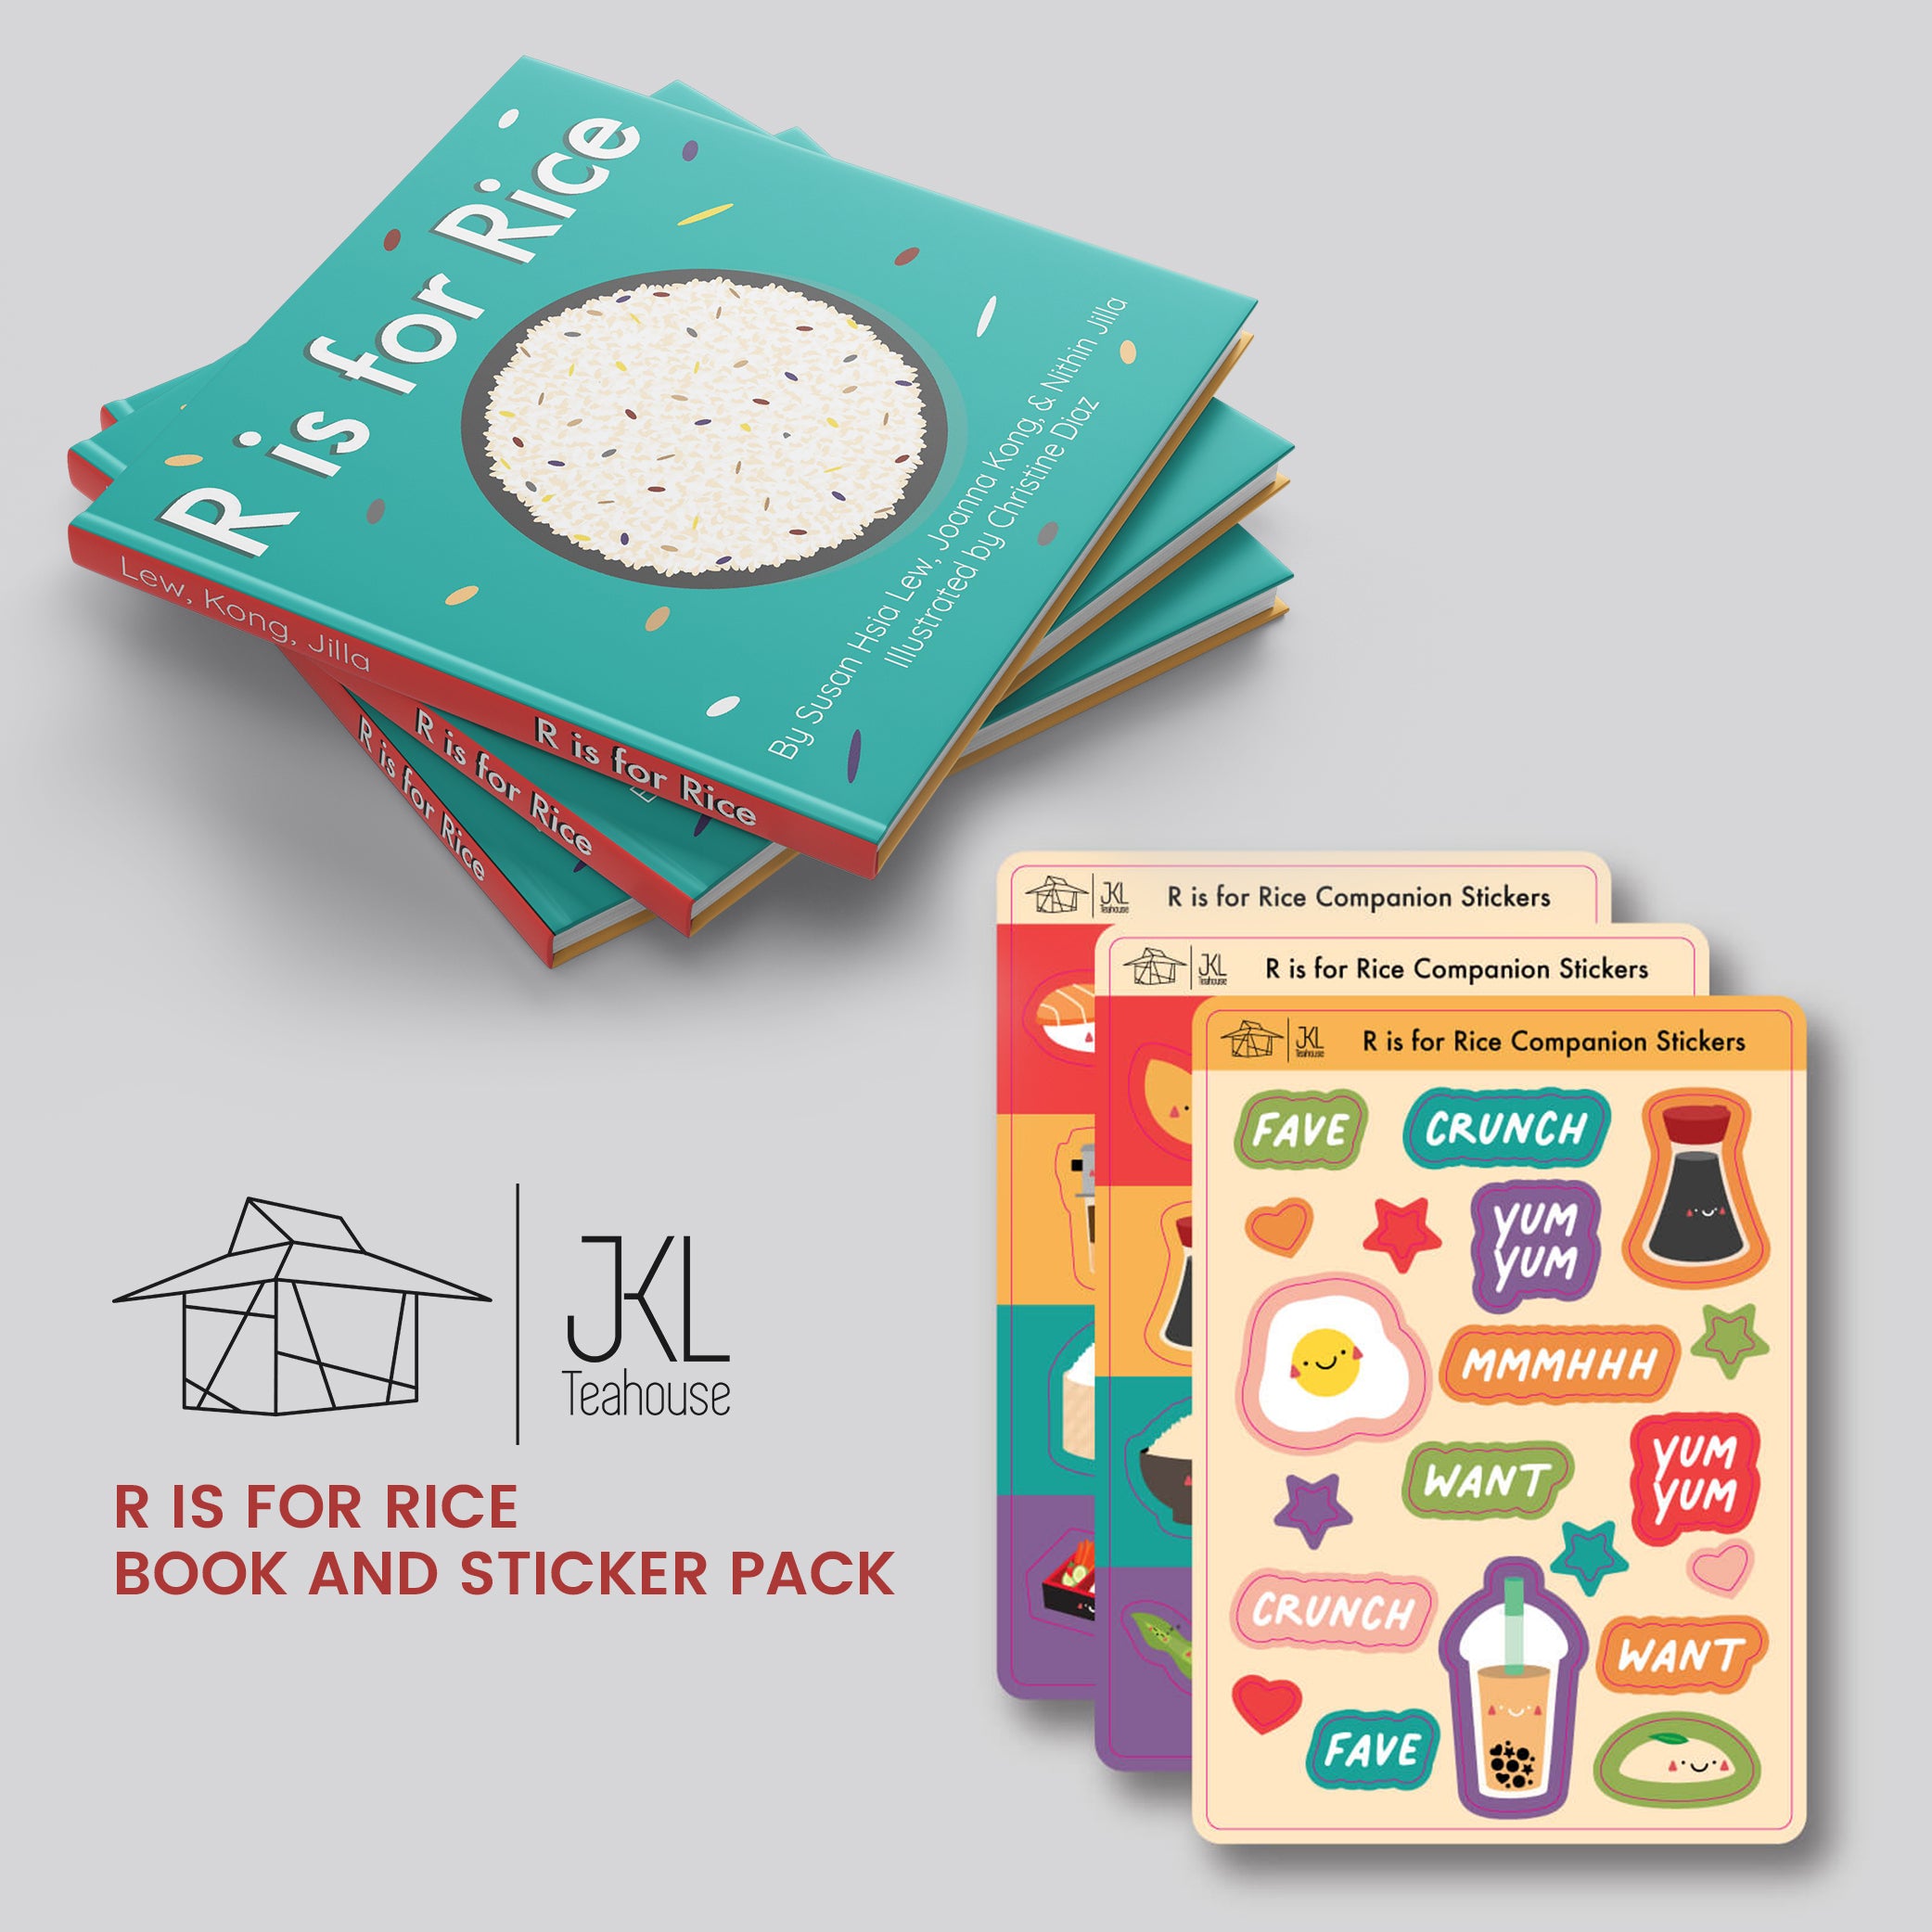 R is for Rice Bundle - Book & Sticker Pack!